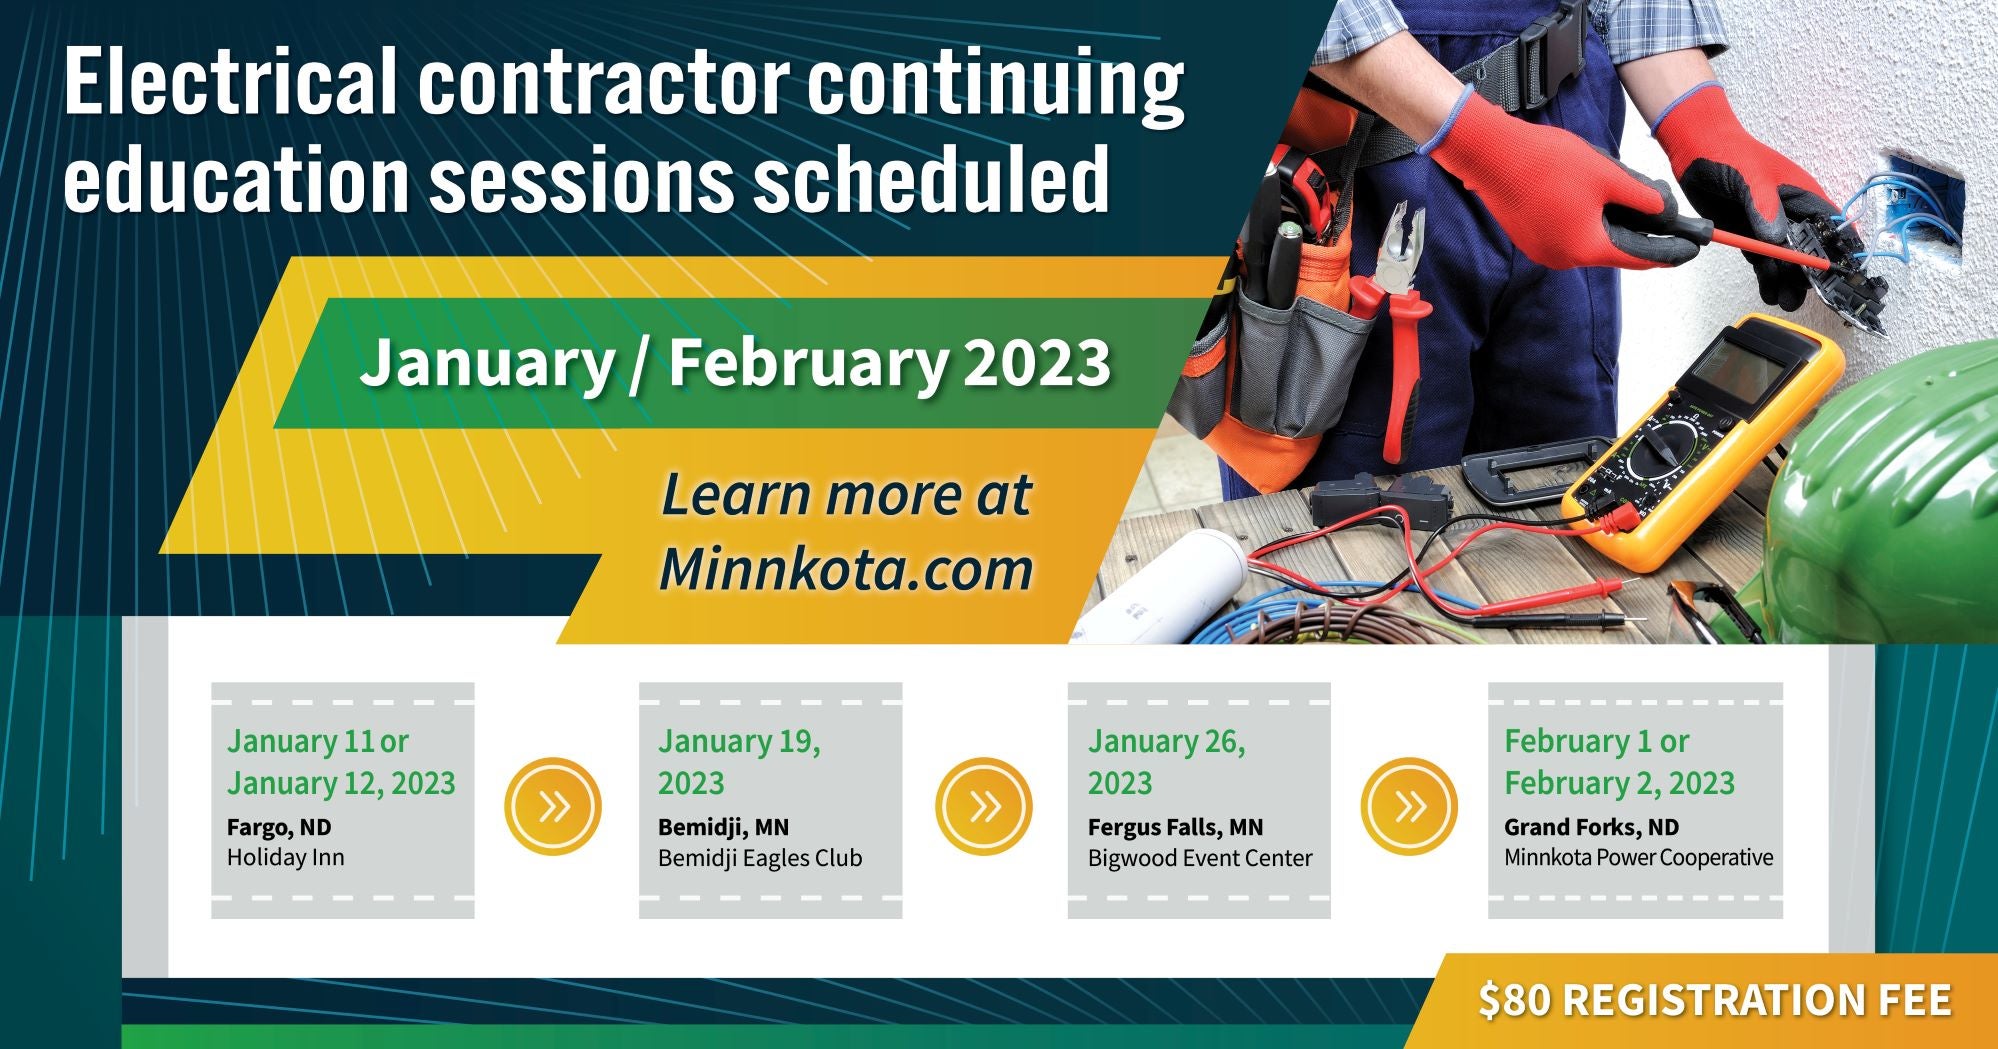 Contractor Training advertisment